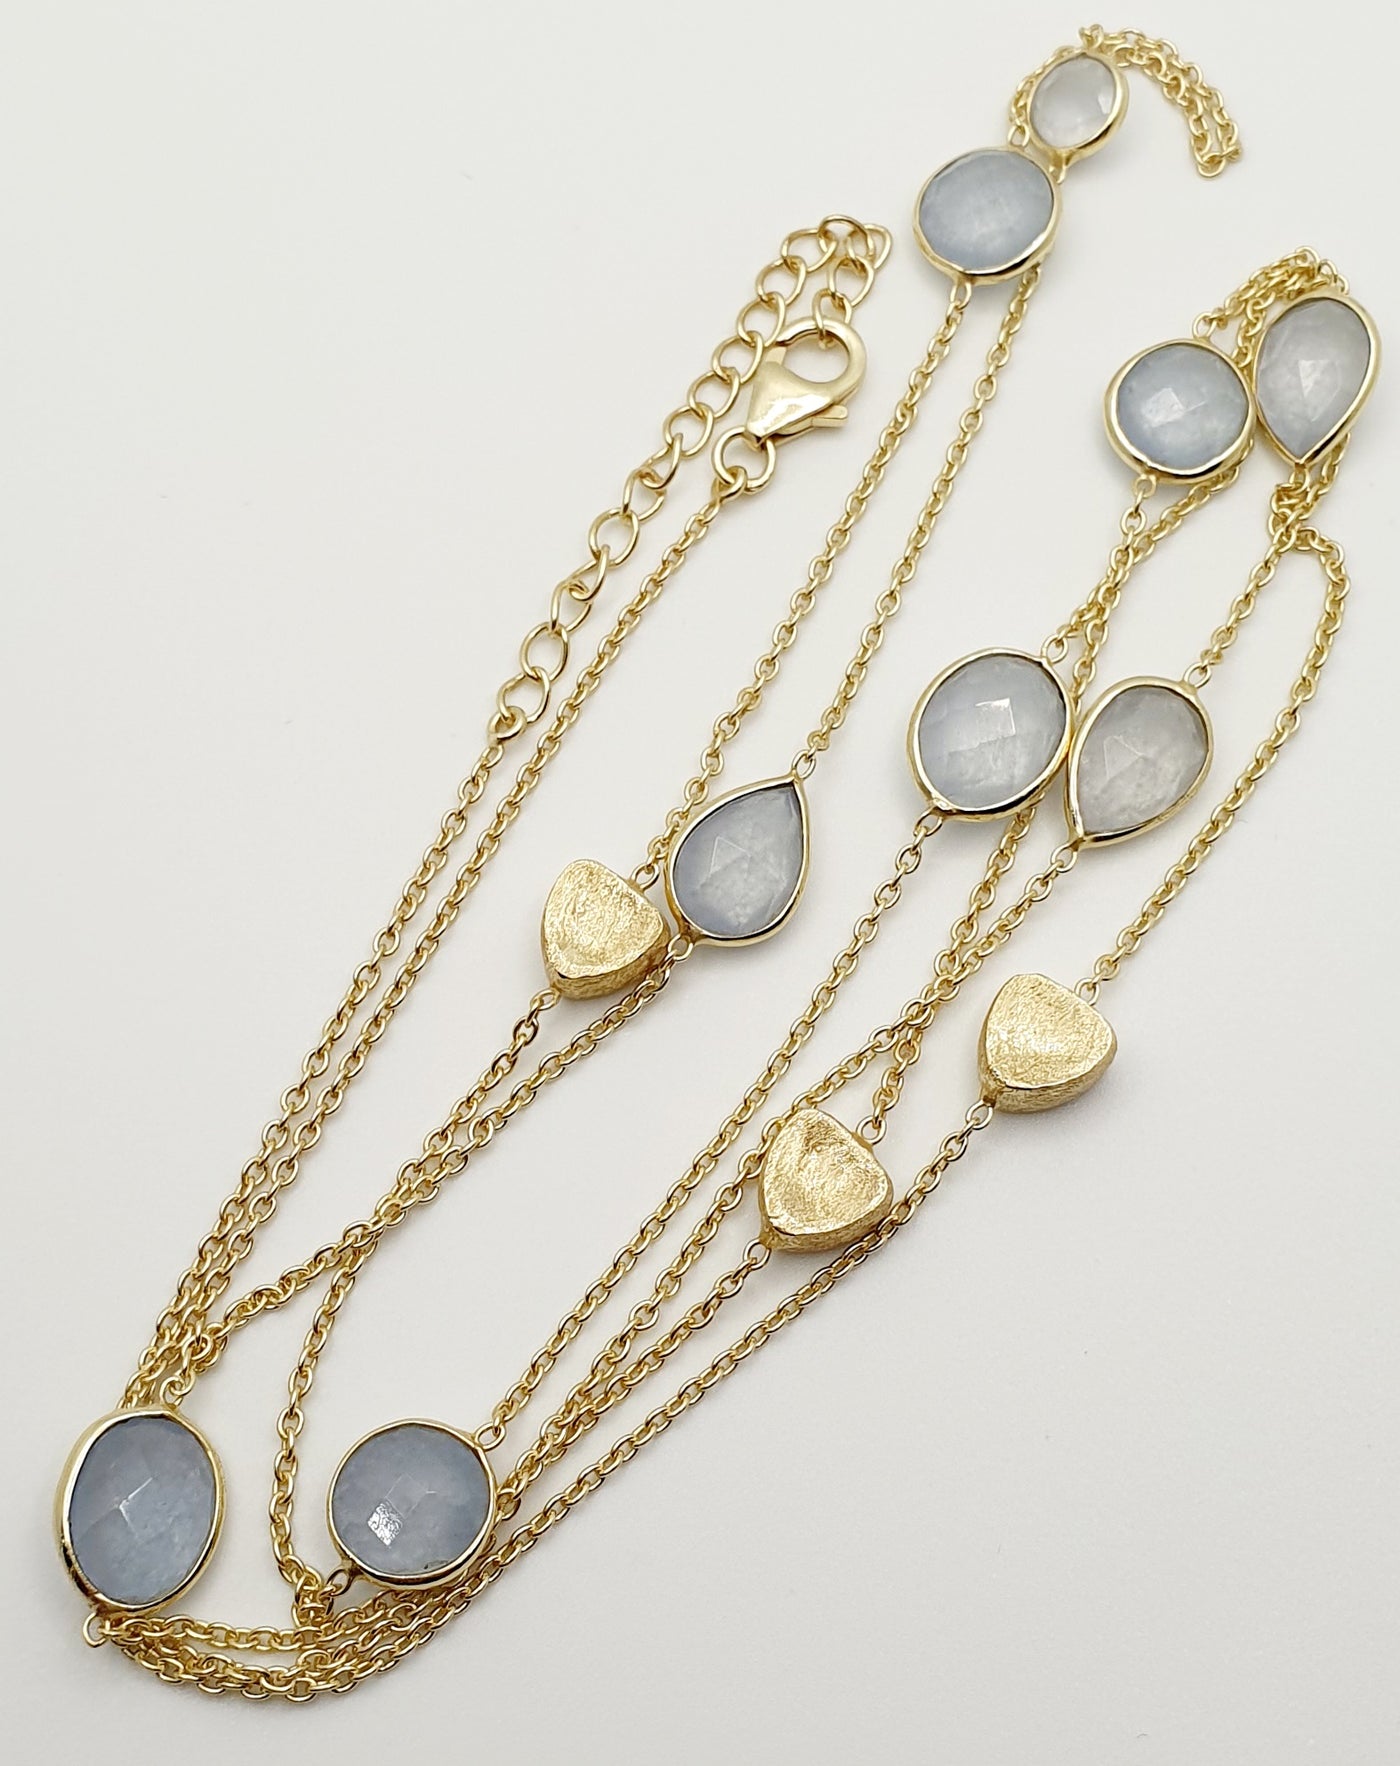 S/S, 18K Yellow Gold Plated (0.3 microns) Lab-created Light Chalcedony 90-95cm Necklace